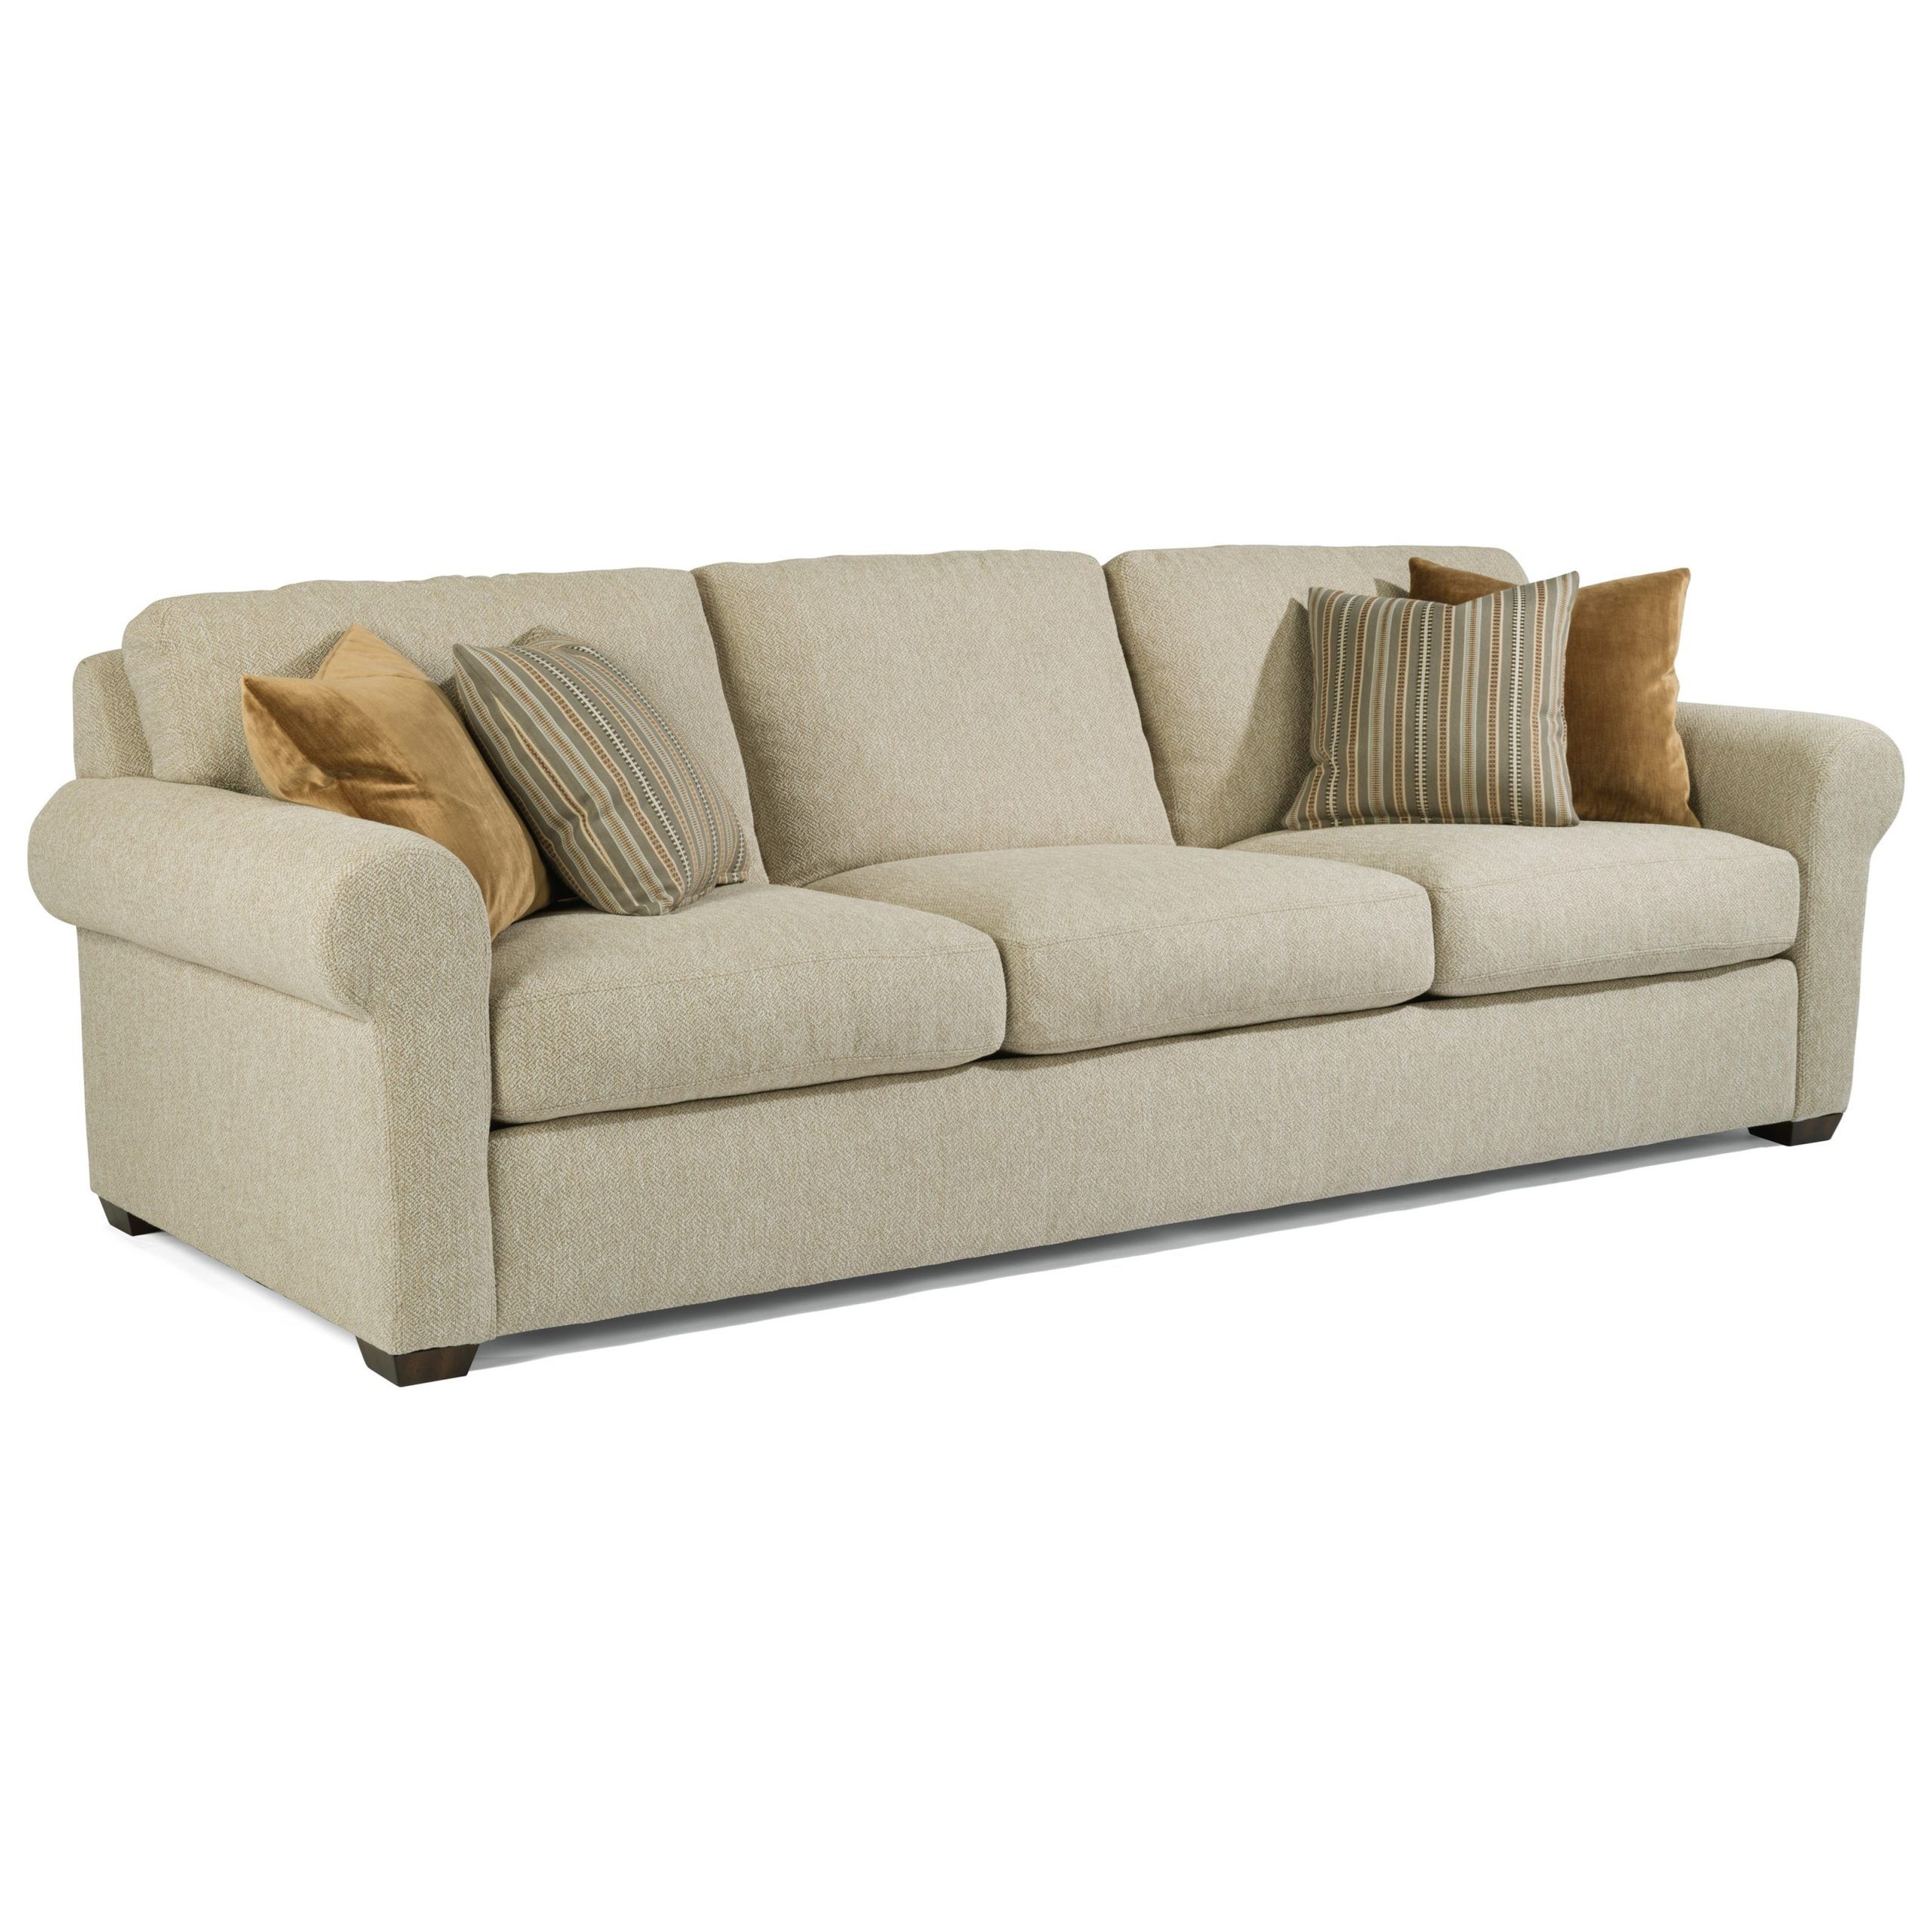 Flexsteel Randall Transitional 105" Three Cushion Sofa With Rolled Arms Inside Sofas With Pillowback Wood Bases (View 6 of 20)